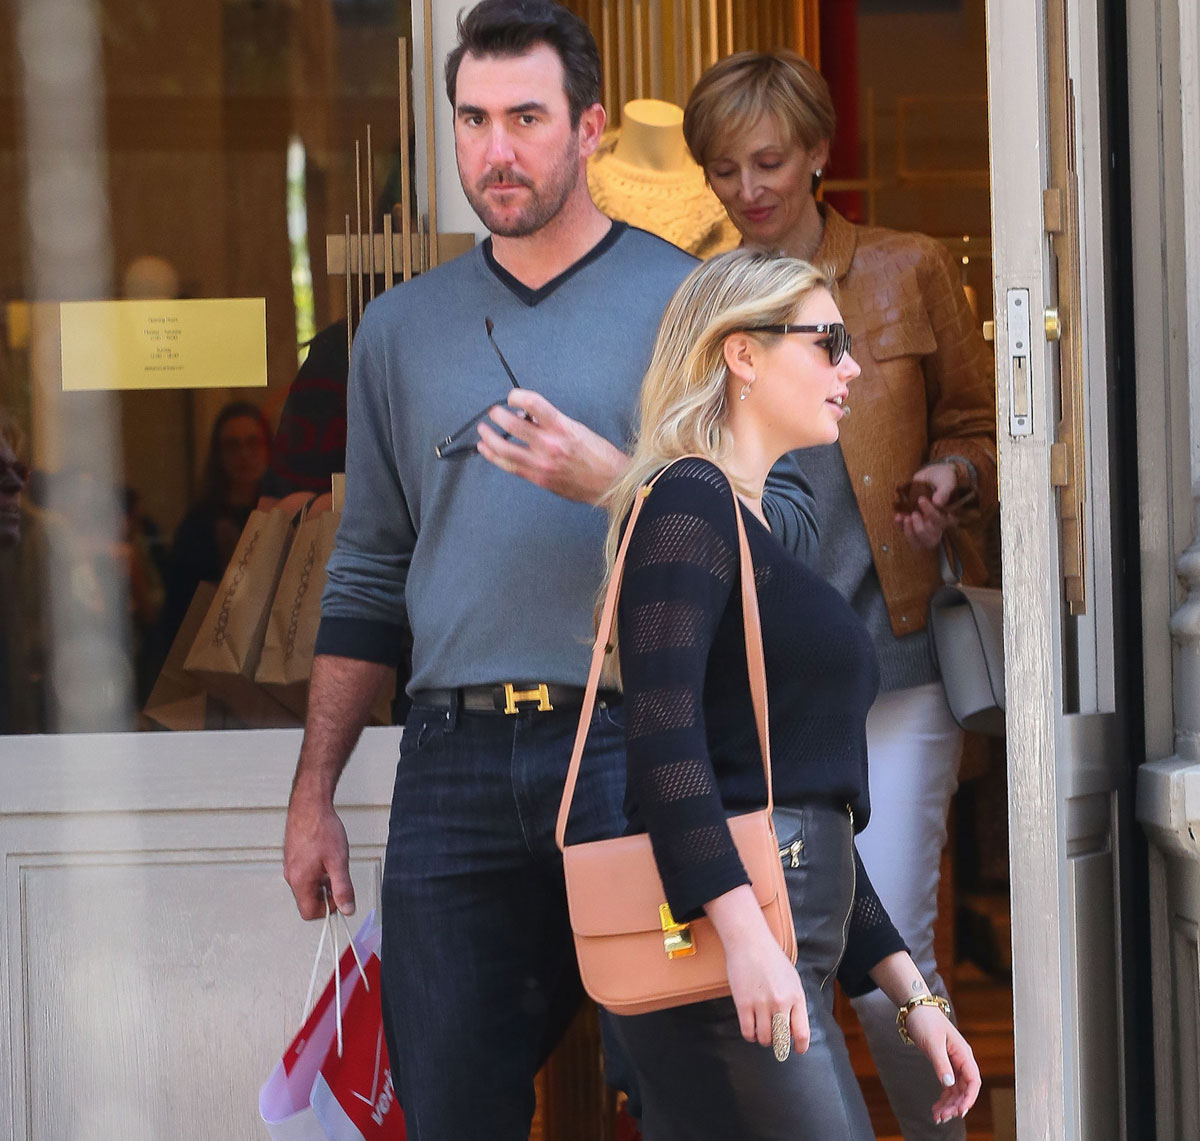 Kate Upton out in NYC